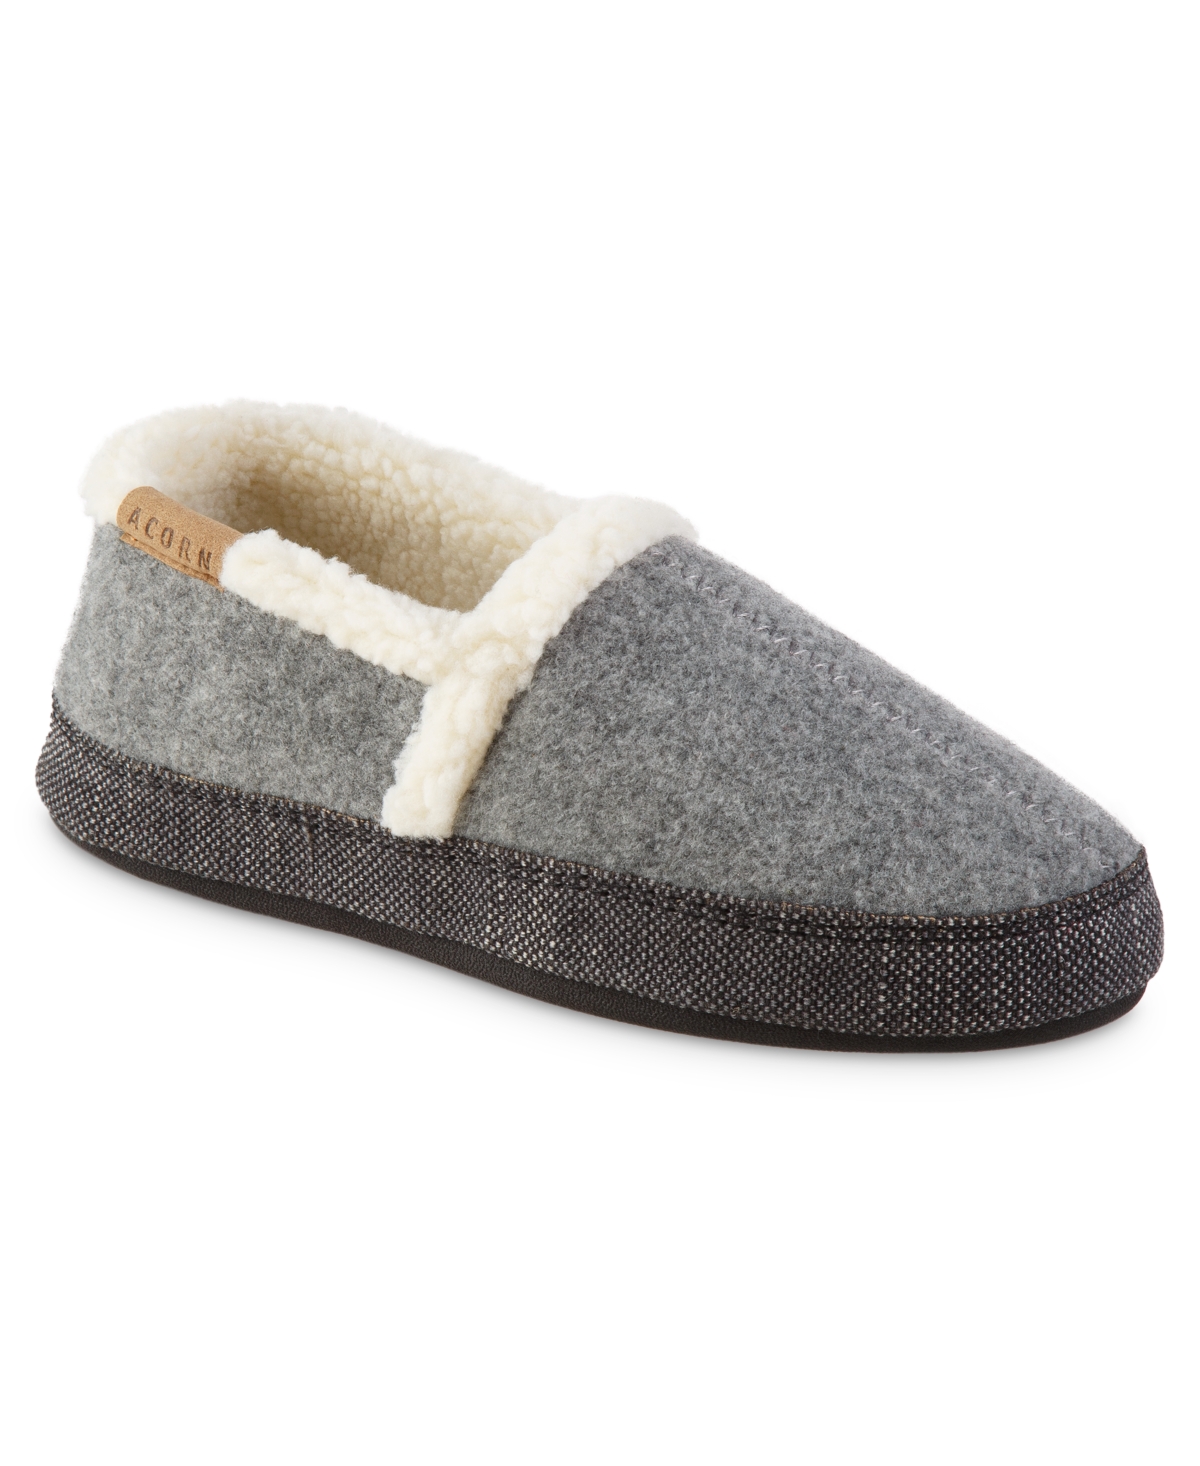 Women's Madison Moccasin Slippers - Ash